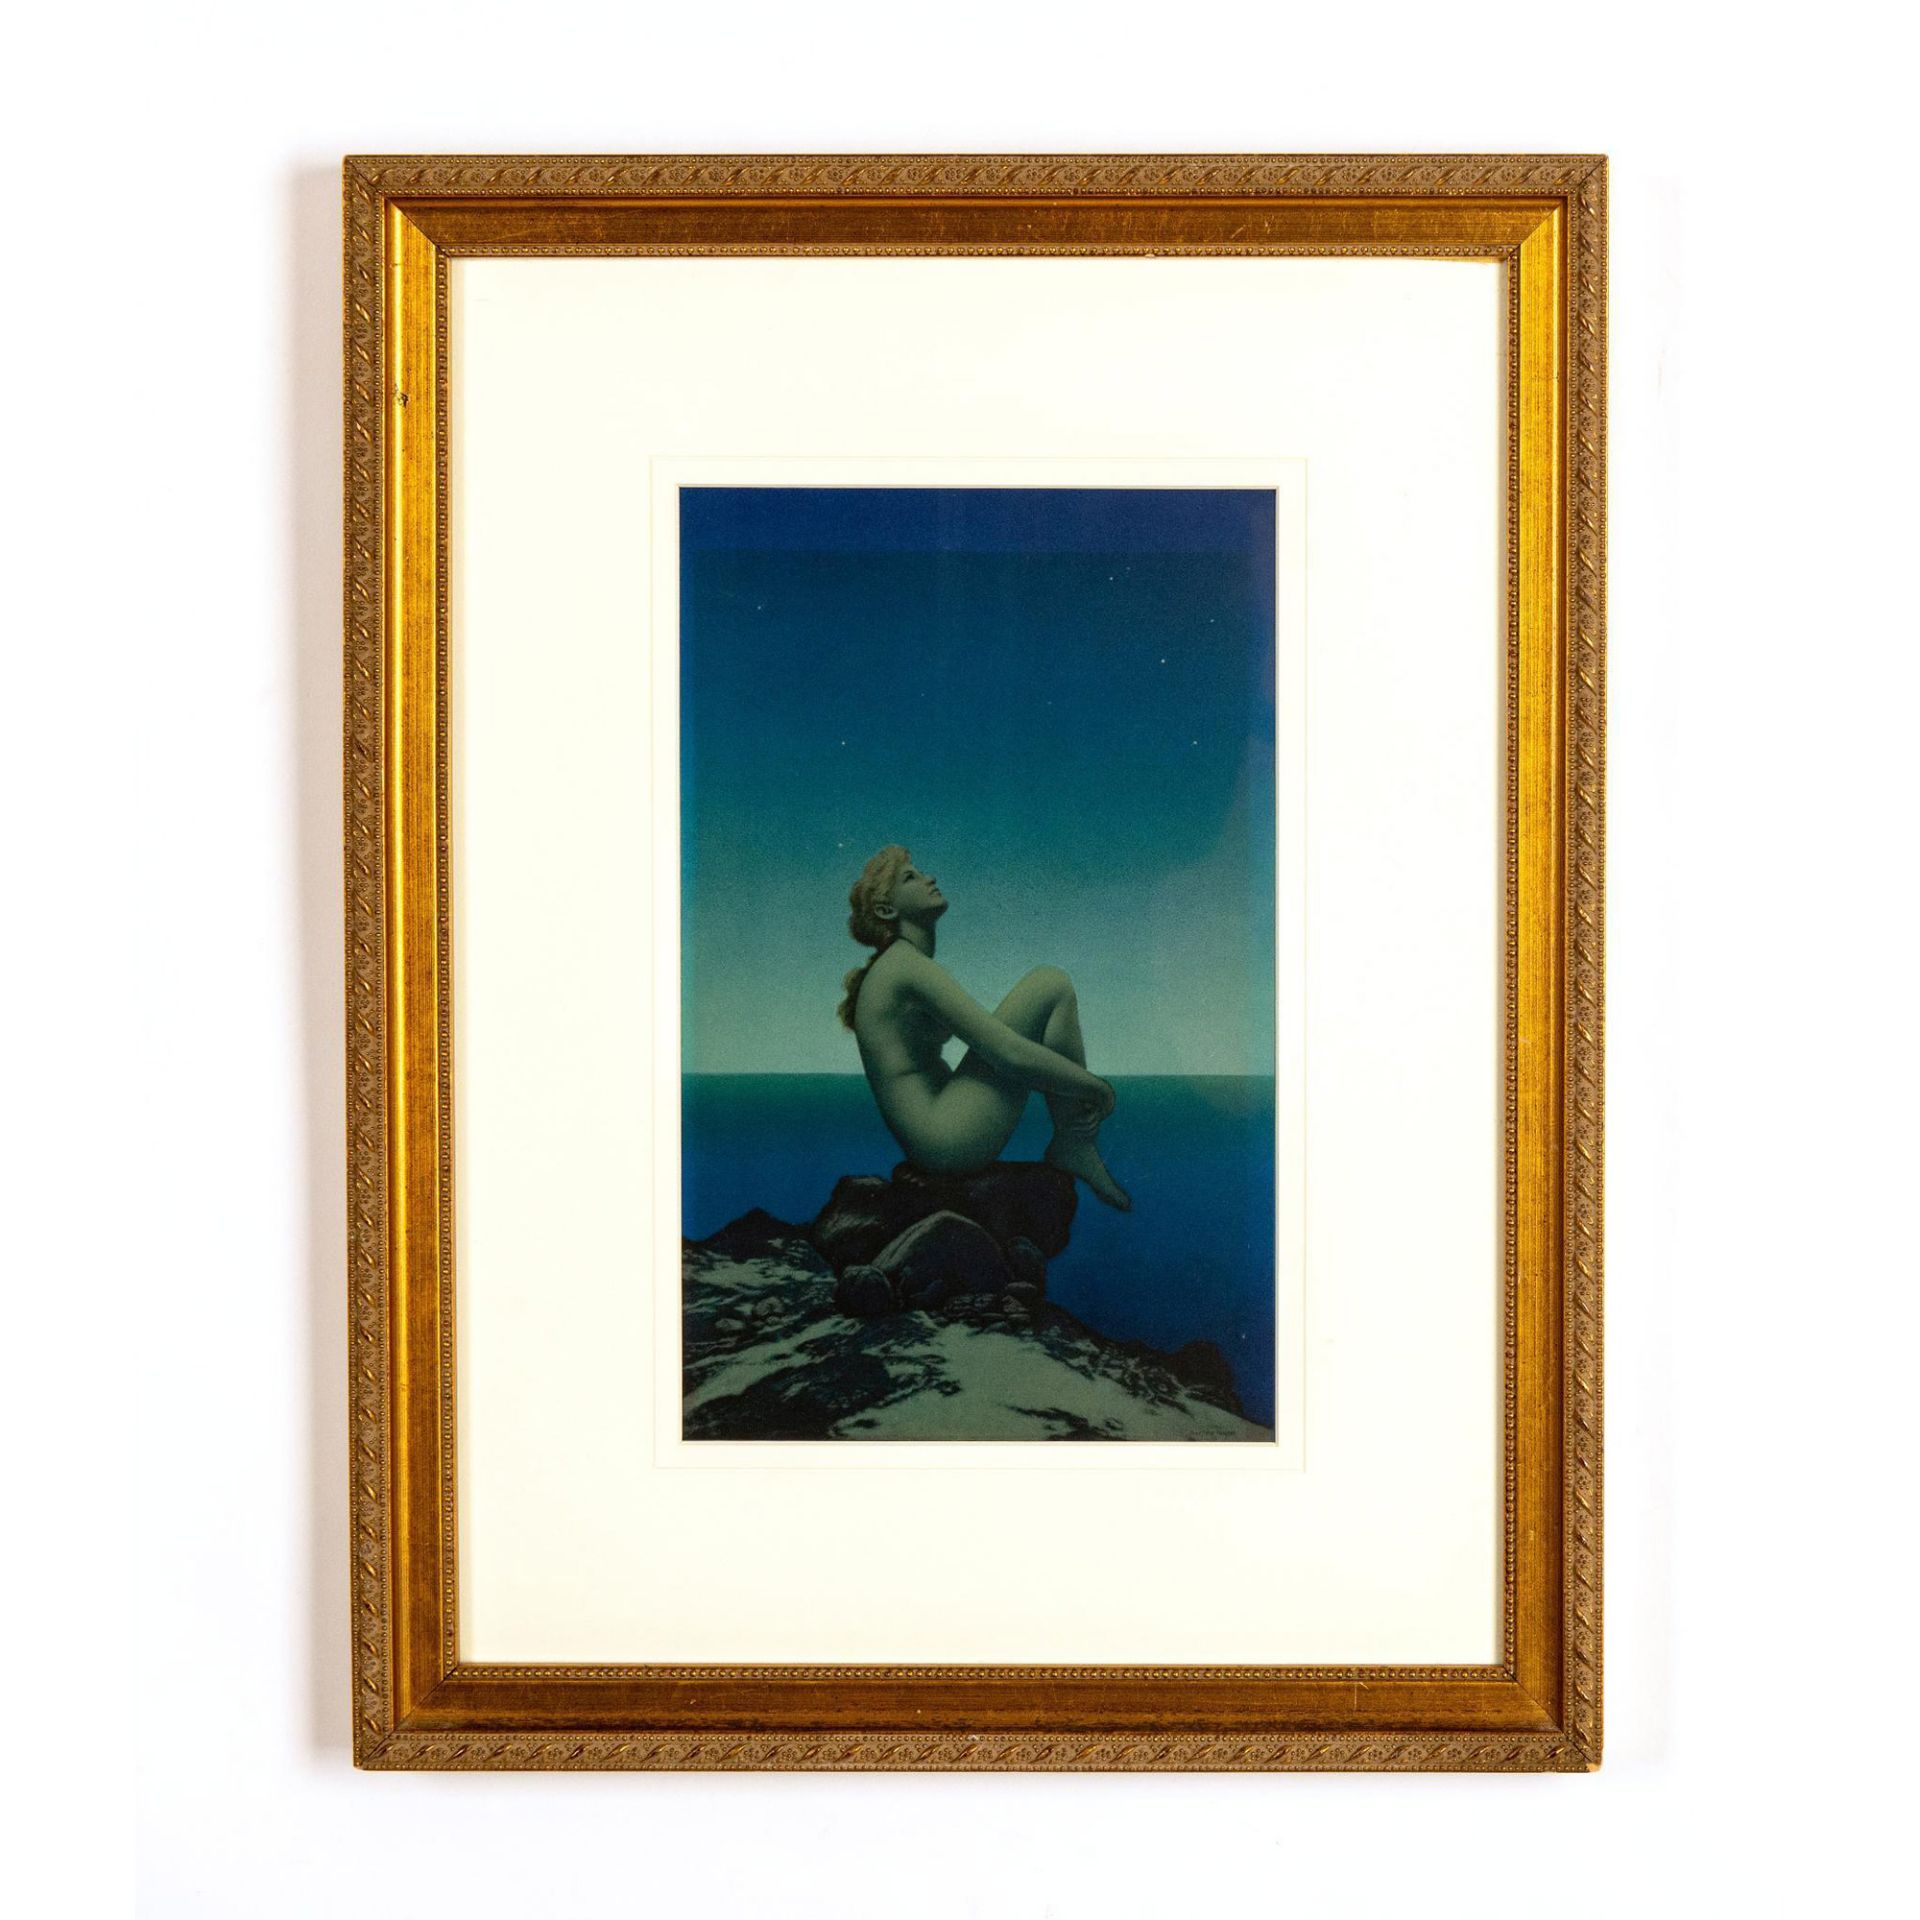 Maxfield Parrish, Framed Antique Print on Paper, Stars